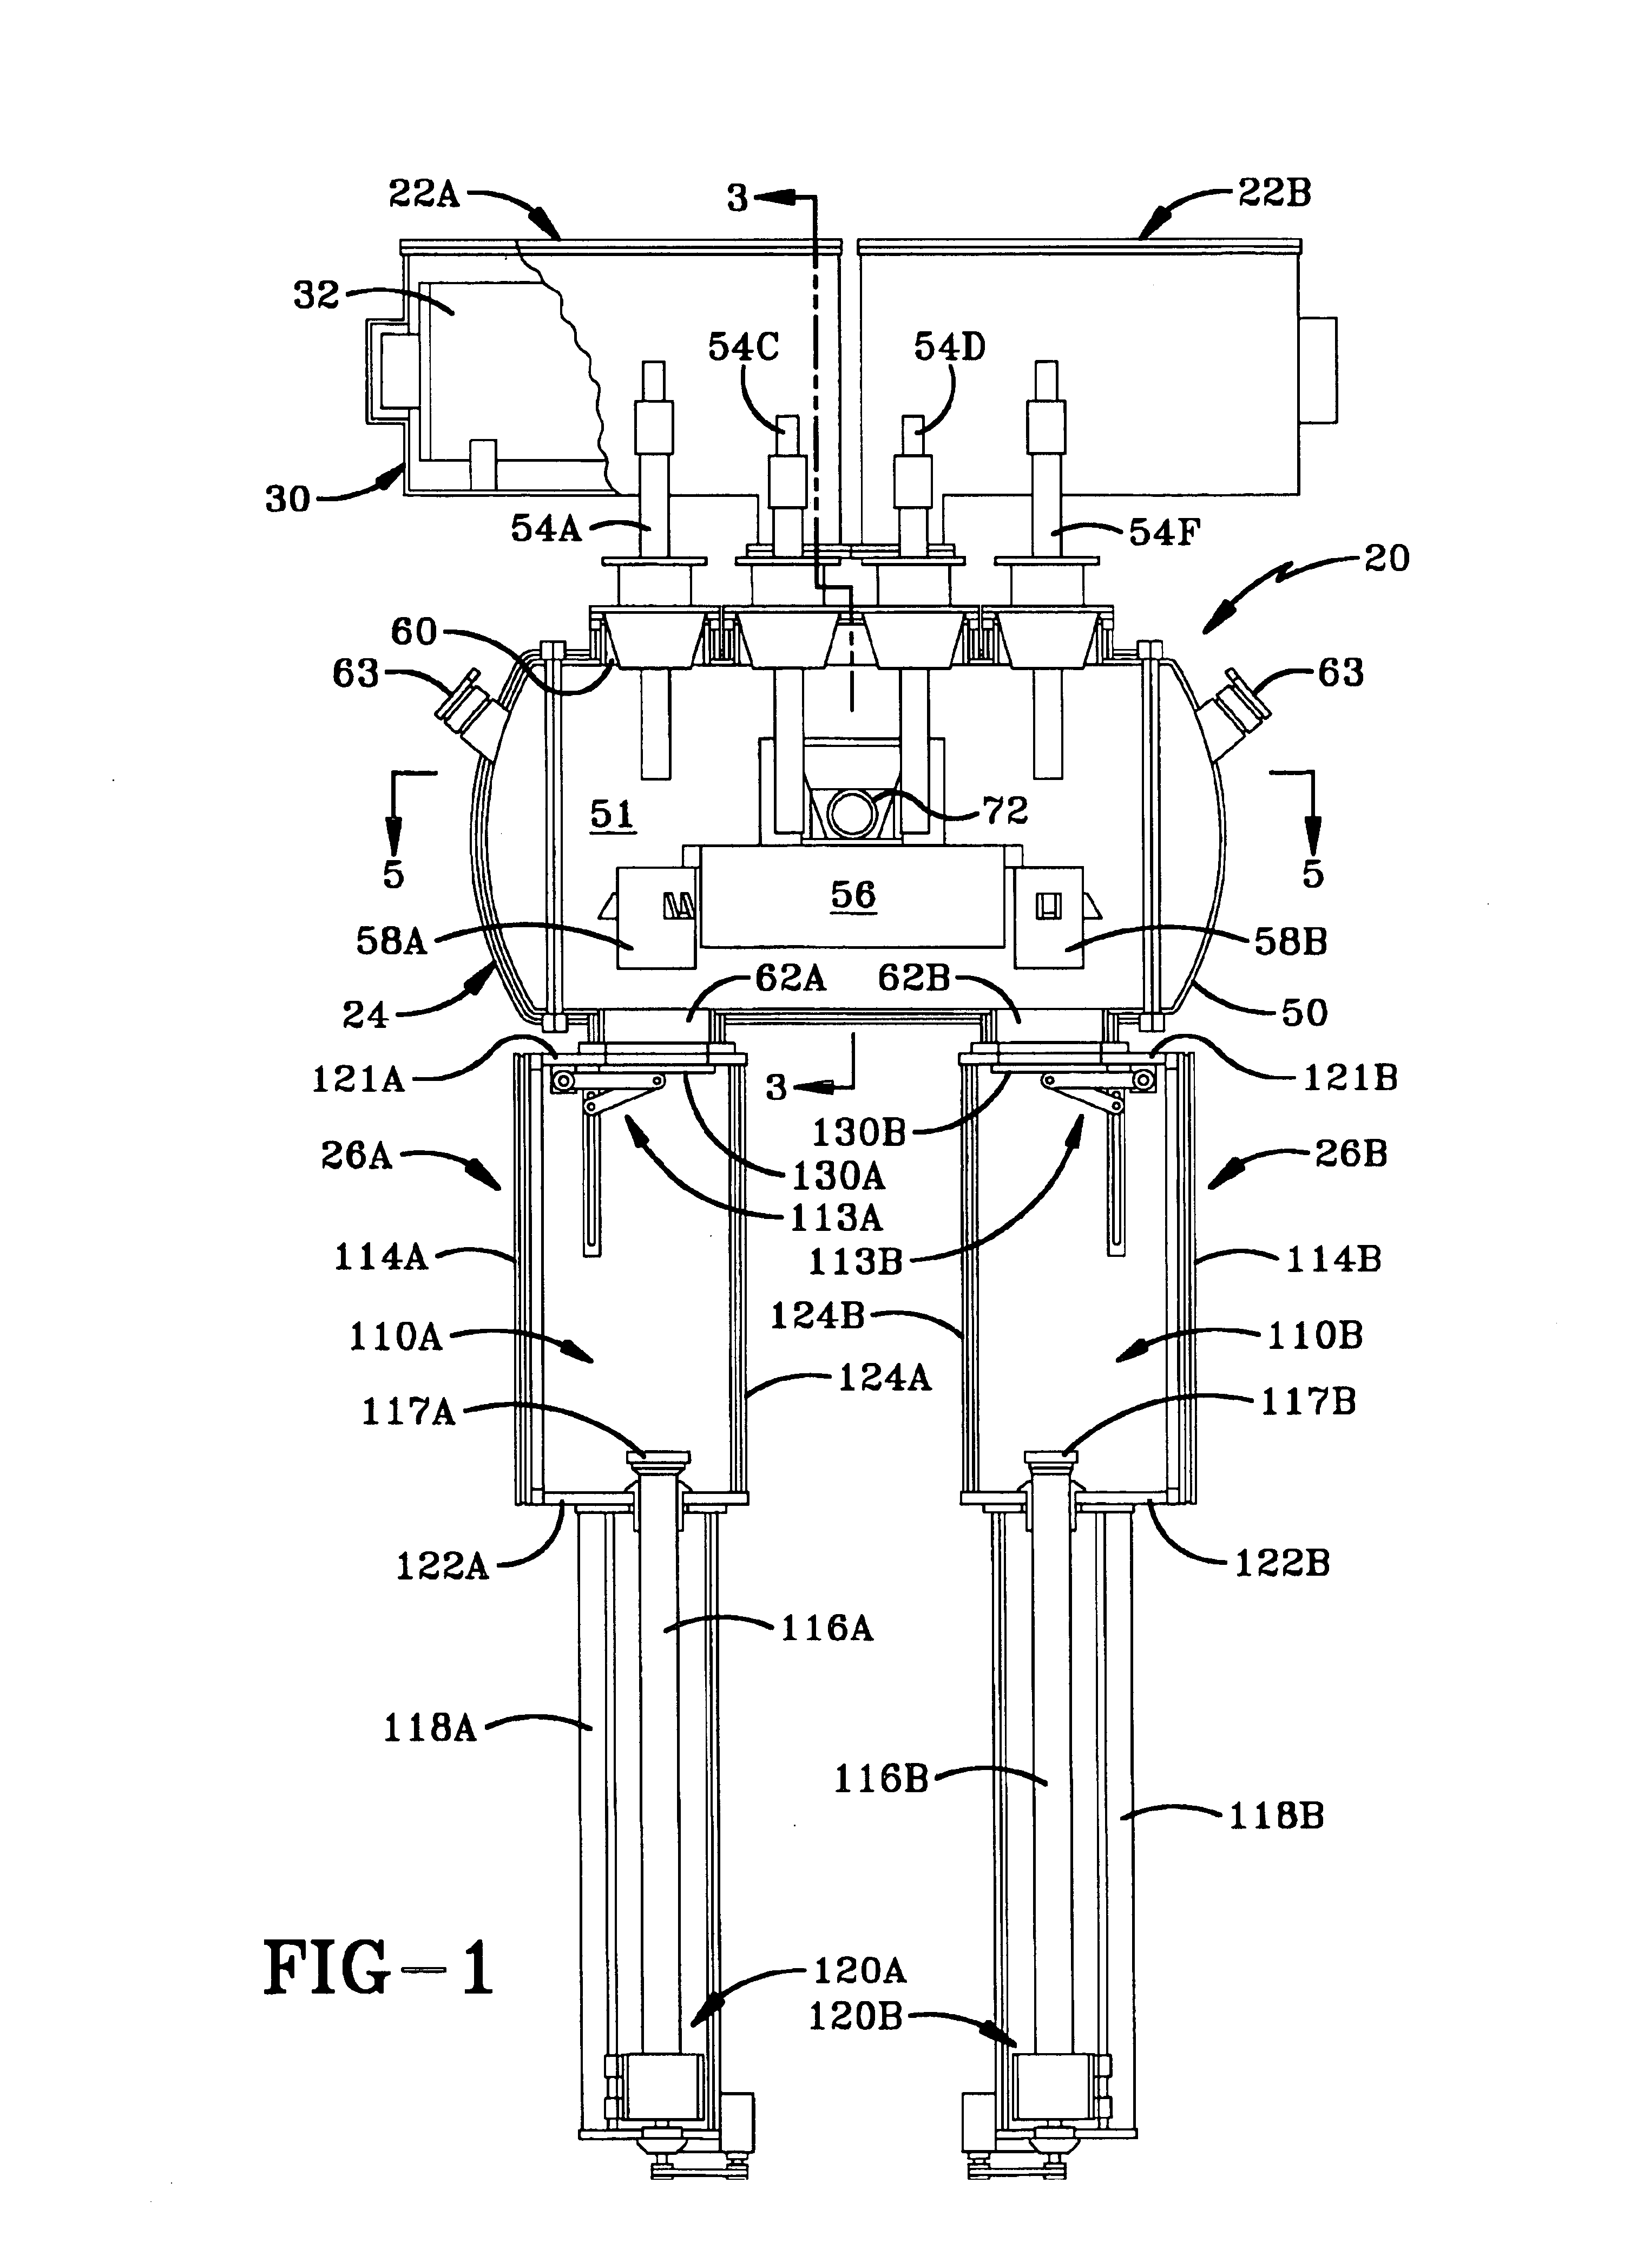 Method and apparatus for melting titanium using a combination of plasma torches and direct arc electrodes